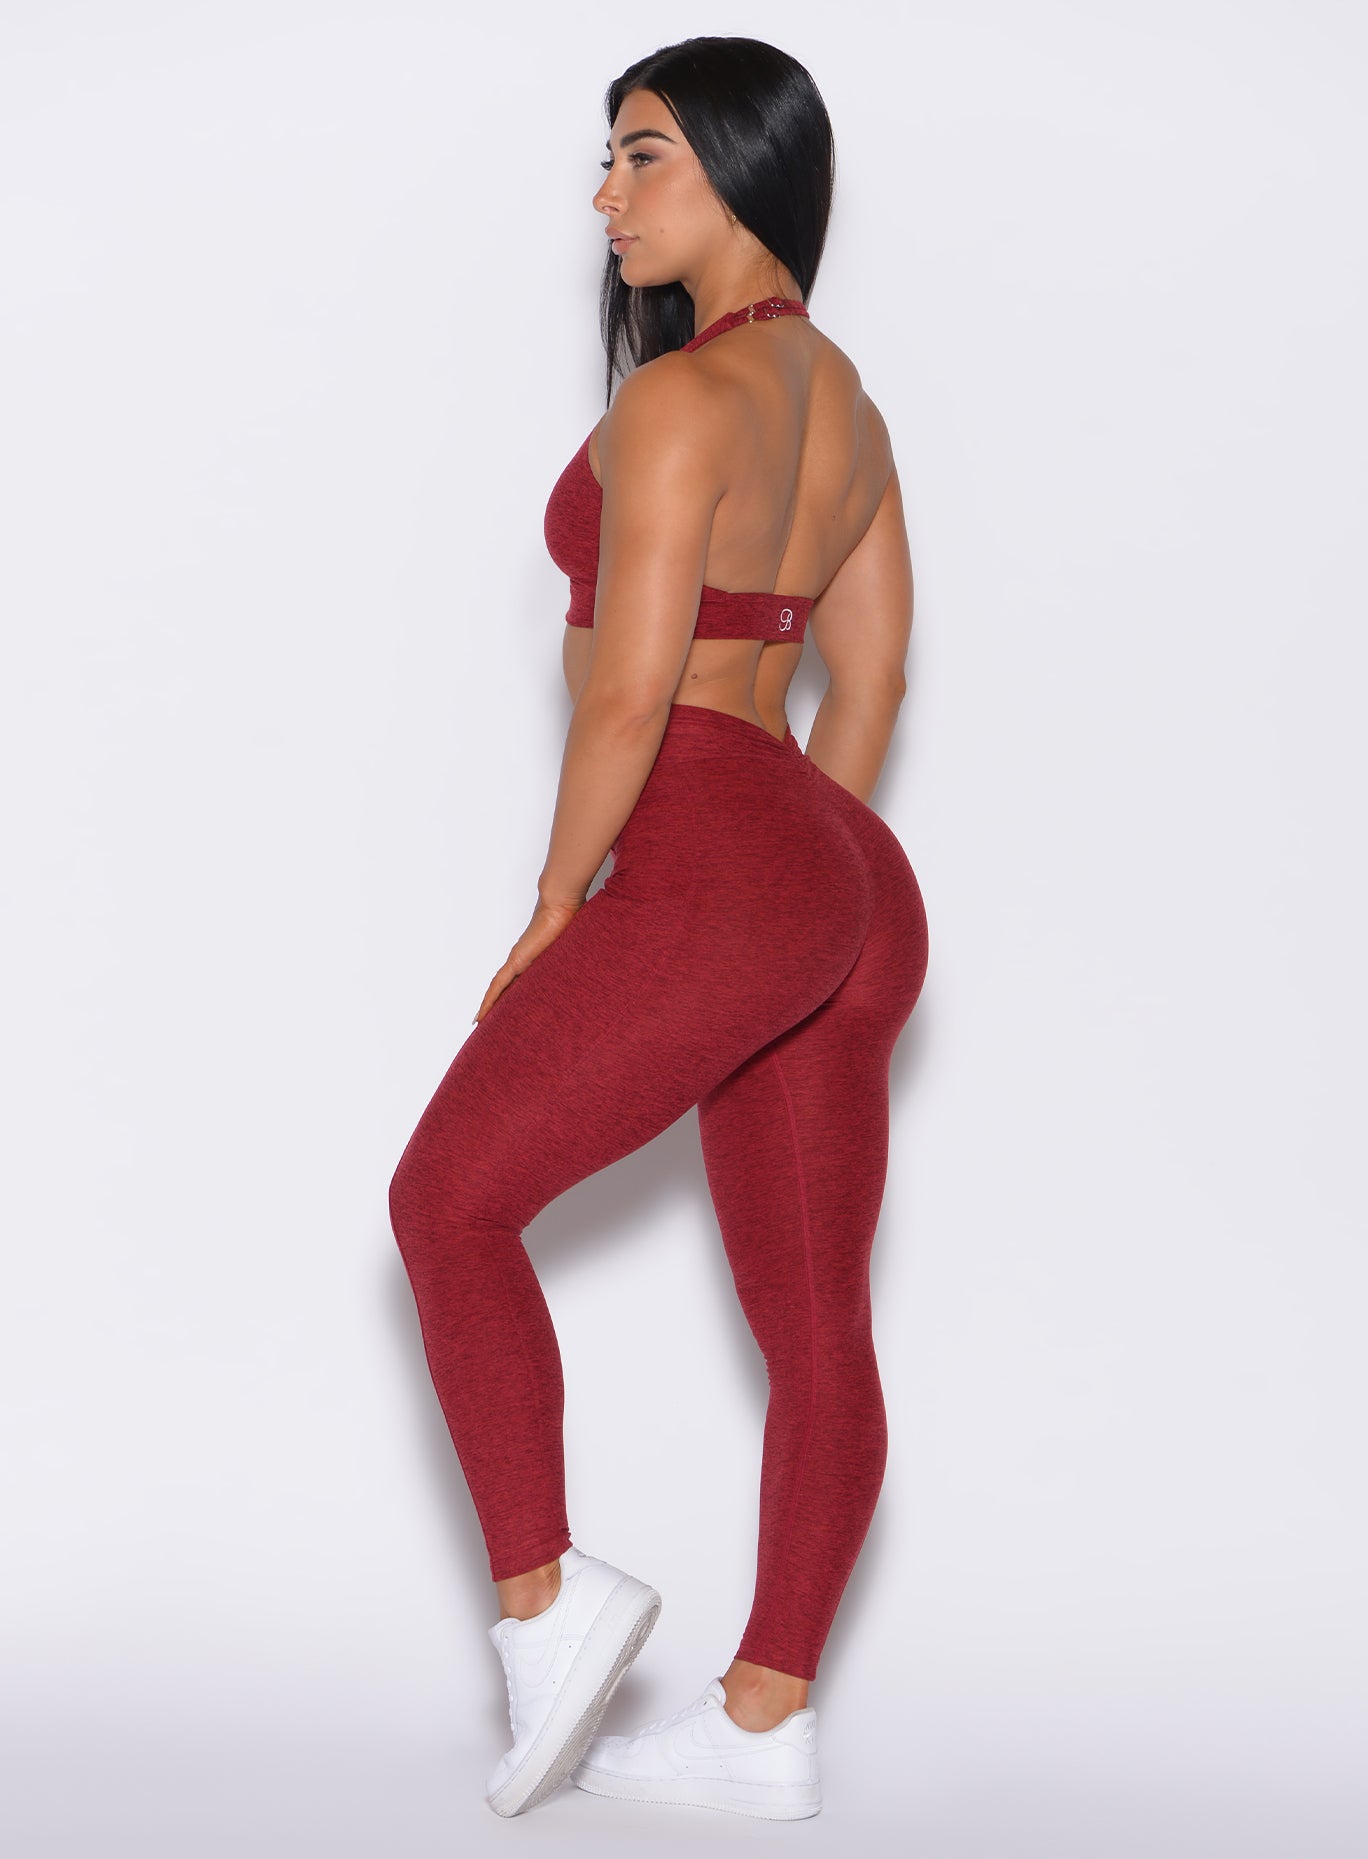 Left side profile view of a model in our V Back Leggings in garnet red color along with the matching bra